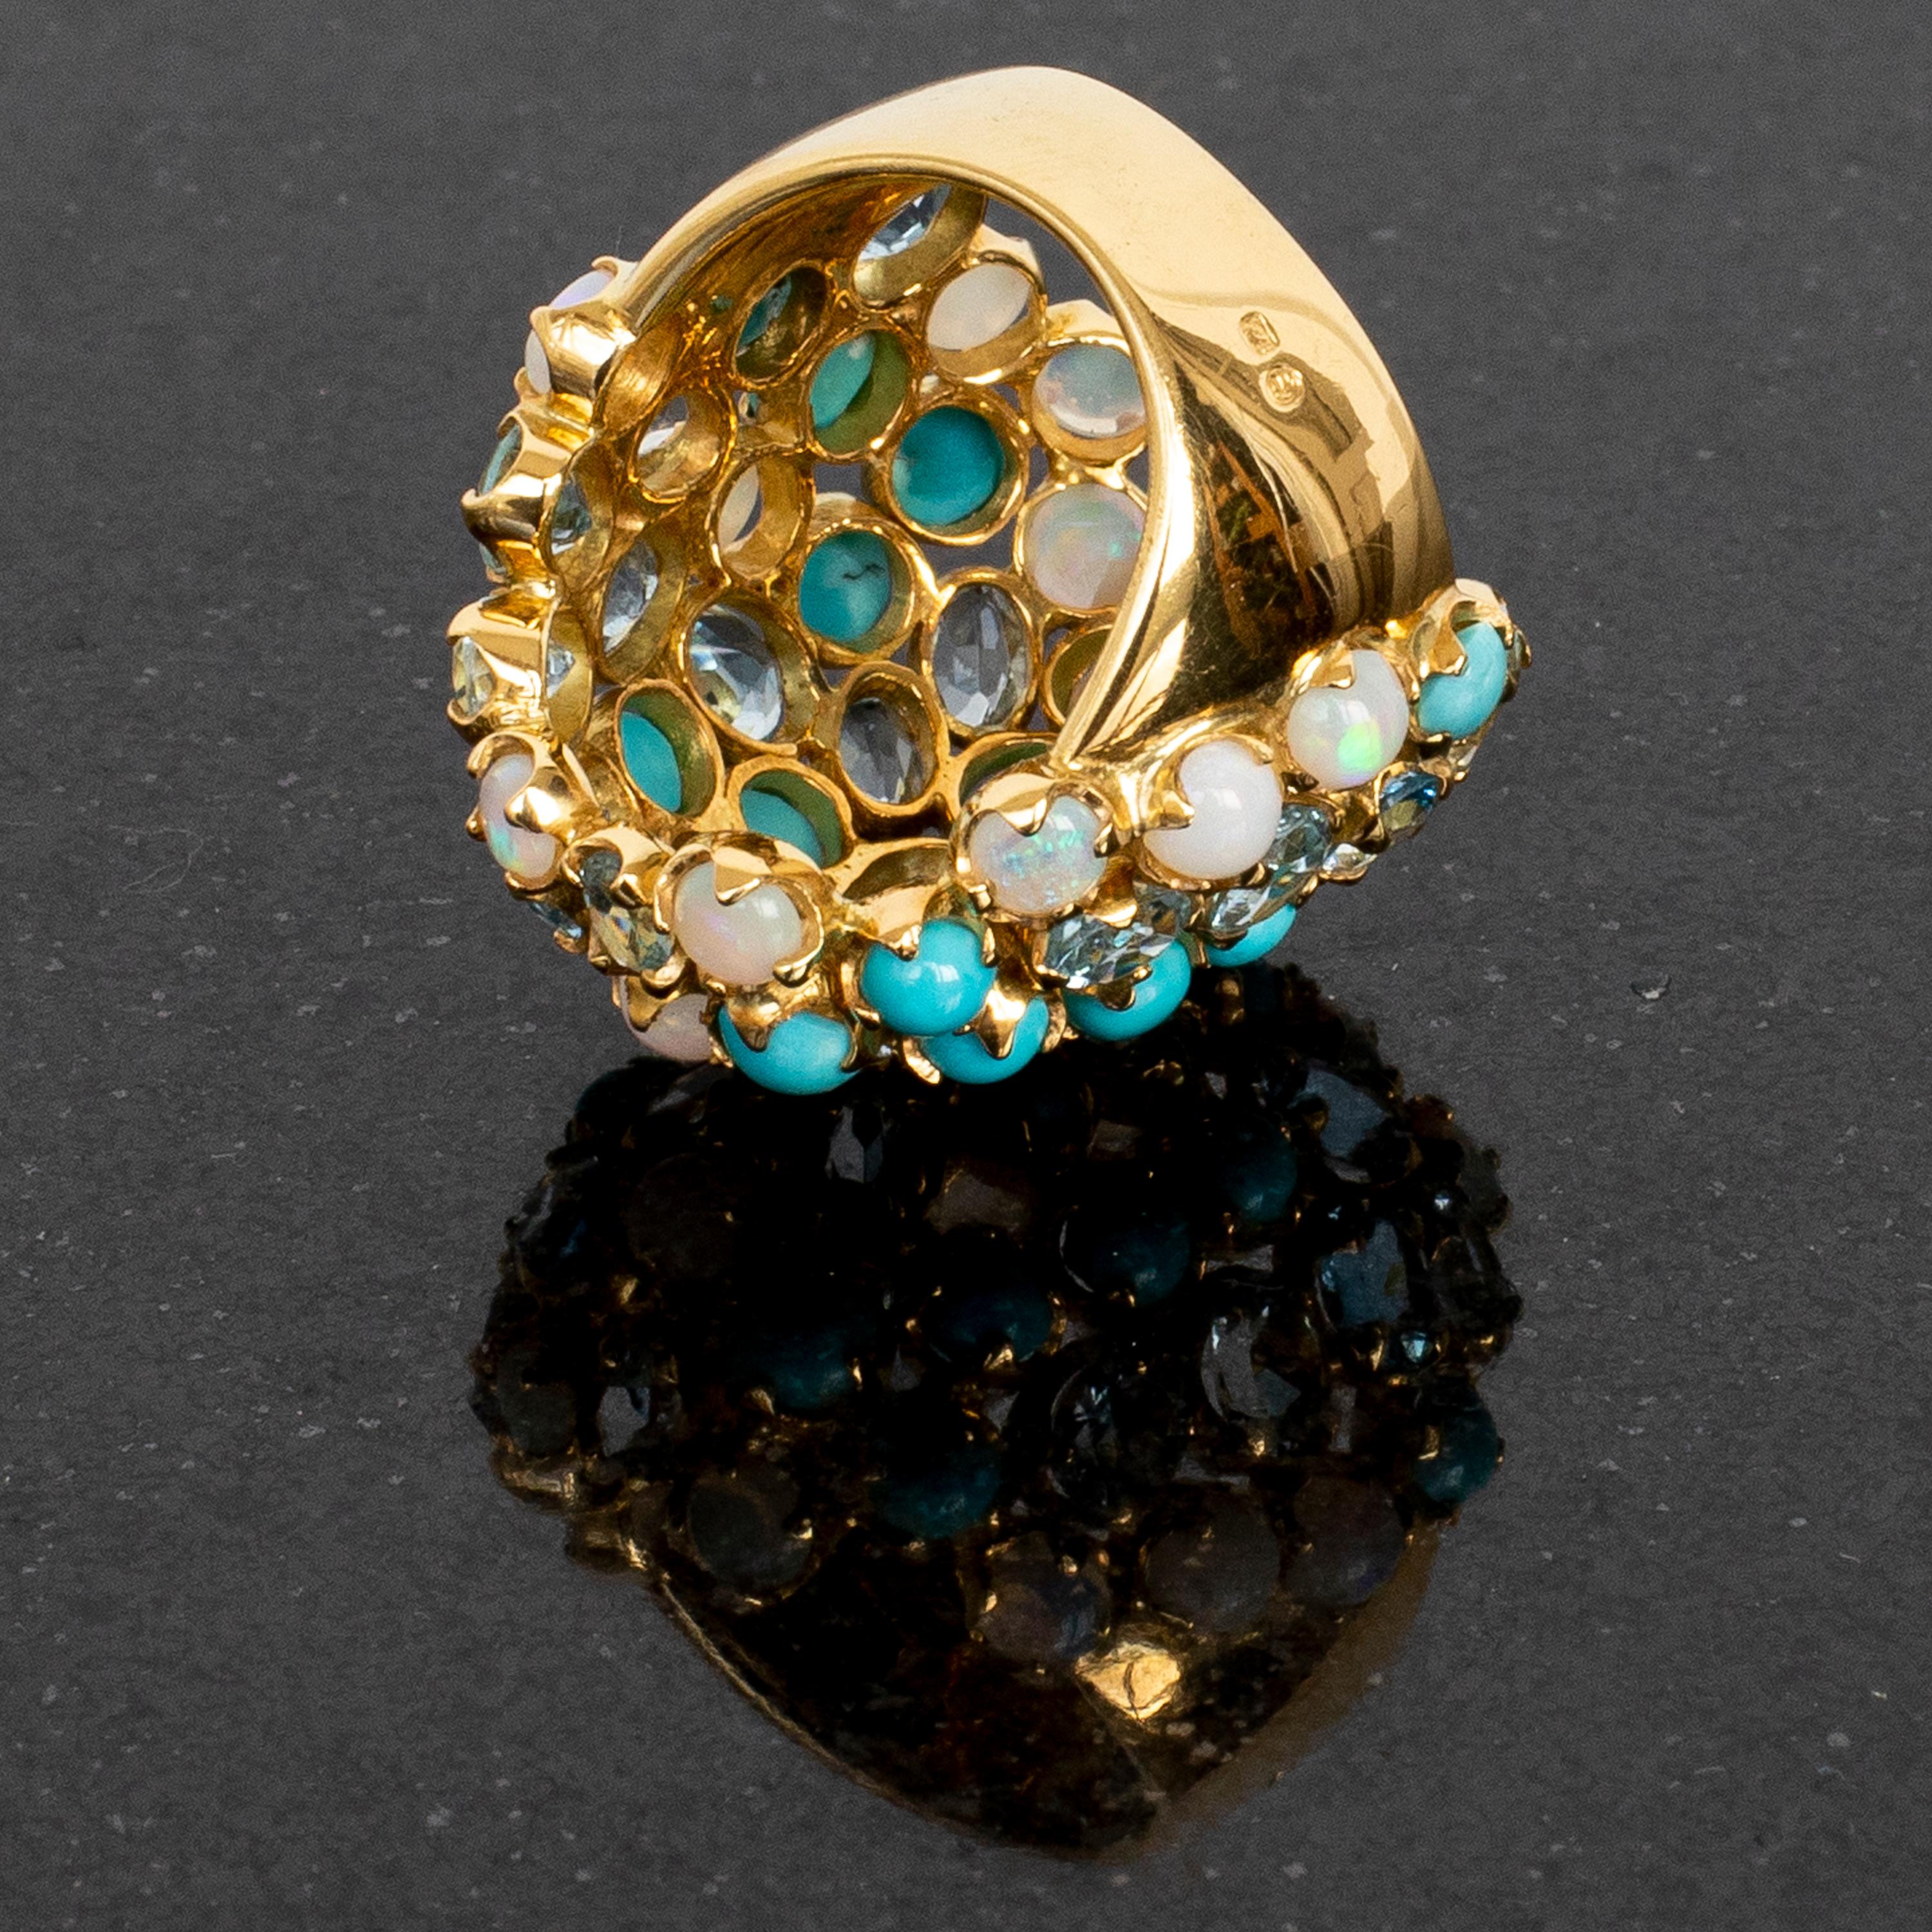 Cabochon Rosior one-off Turquoise, Aquamarine and Opal Cocktail Ring set in Yellow Gold